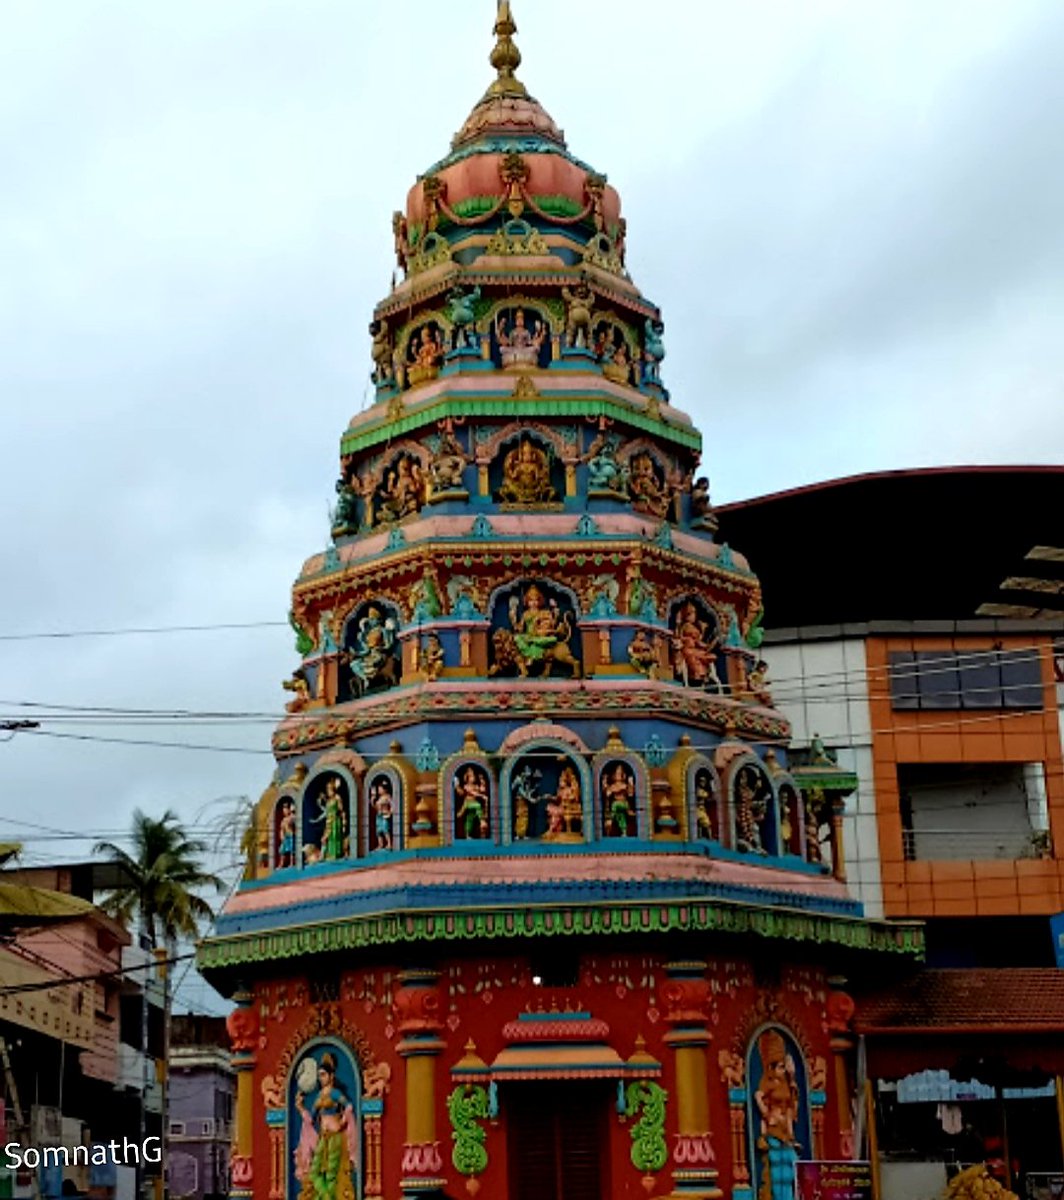 The temple was built in the center of the city during the reign of Venkatappa Nayak who ruled over Keladi and Ikkeri kingdom during the 16th century. Marikamba was the family deity of the Nayaka dynasty.